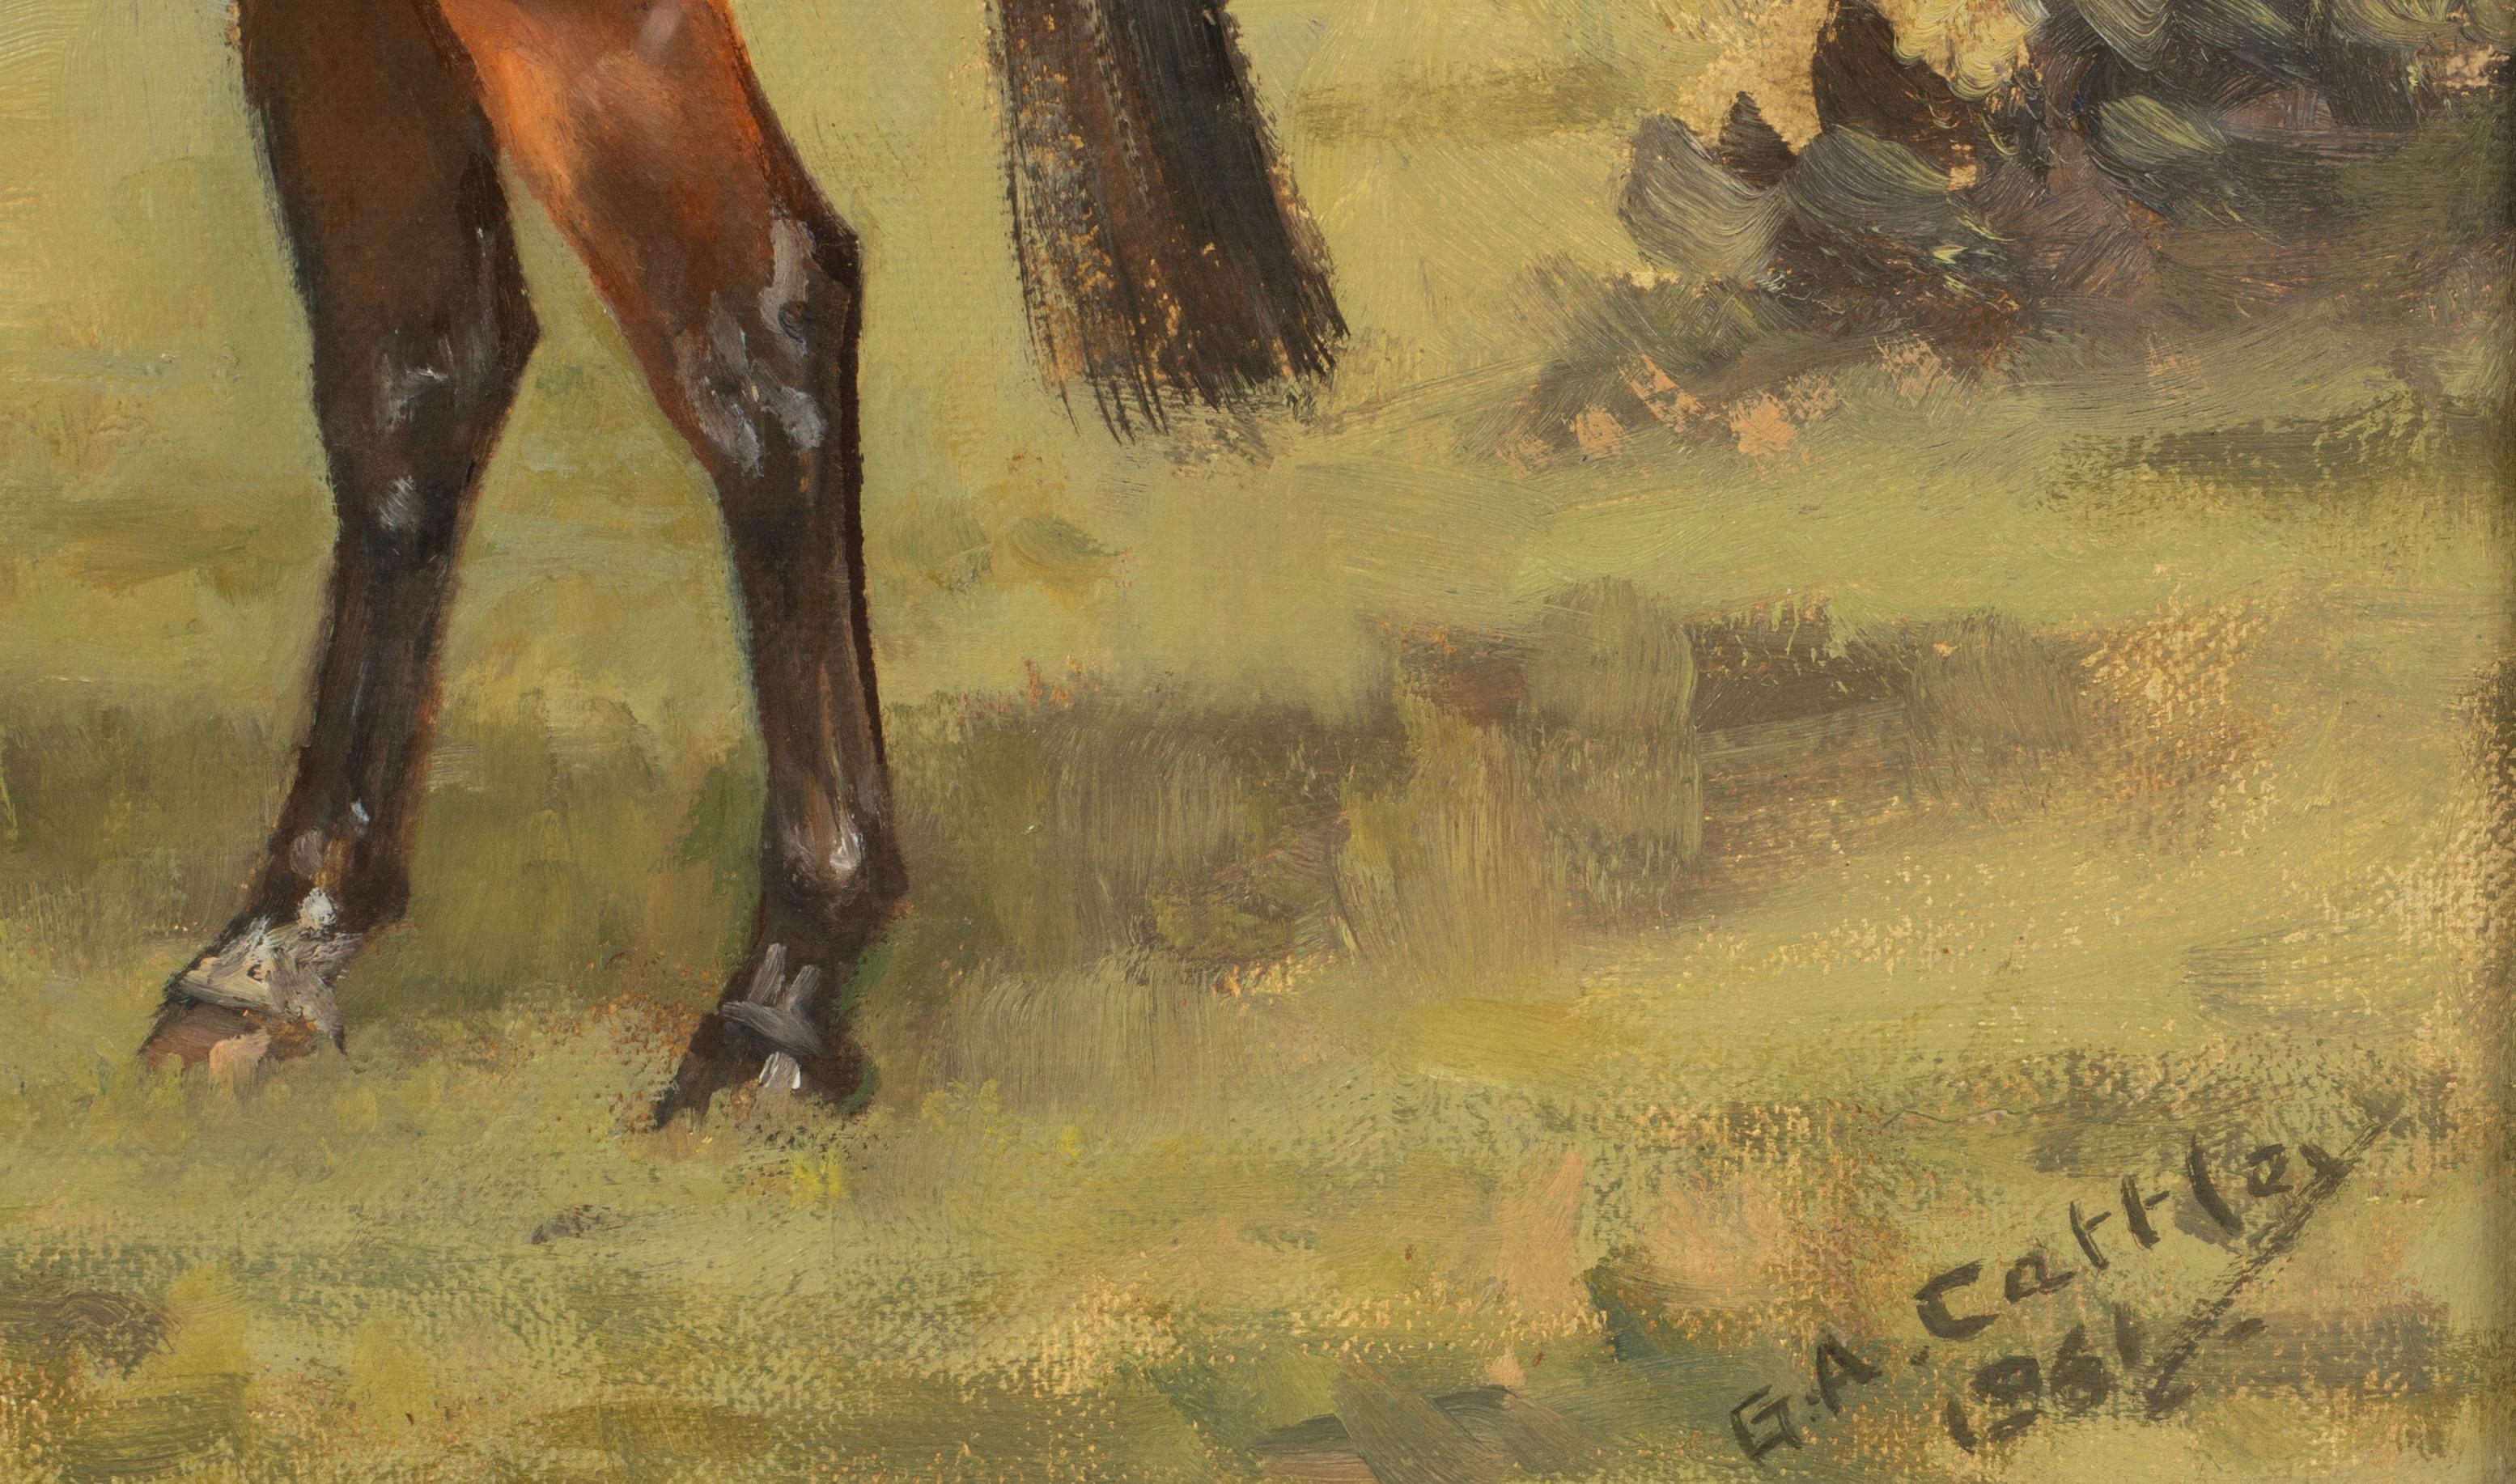 Horse in a Landscape
by Major George A Cattley (English, 1896-1978)
signed & dated 1961
oil painting on canvas board, 14 x 20 inches
framed
condition: overall very good and pleasing, a few minor surface marks and stains. 
provenance: from a private